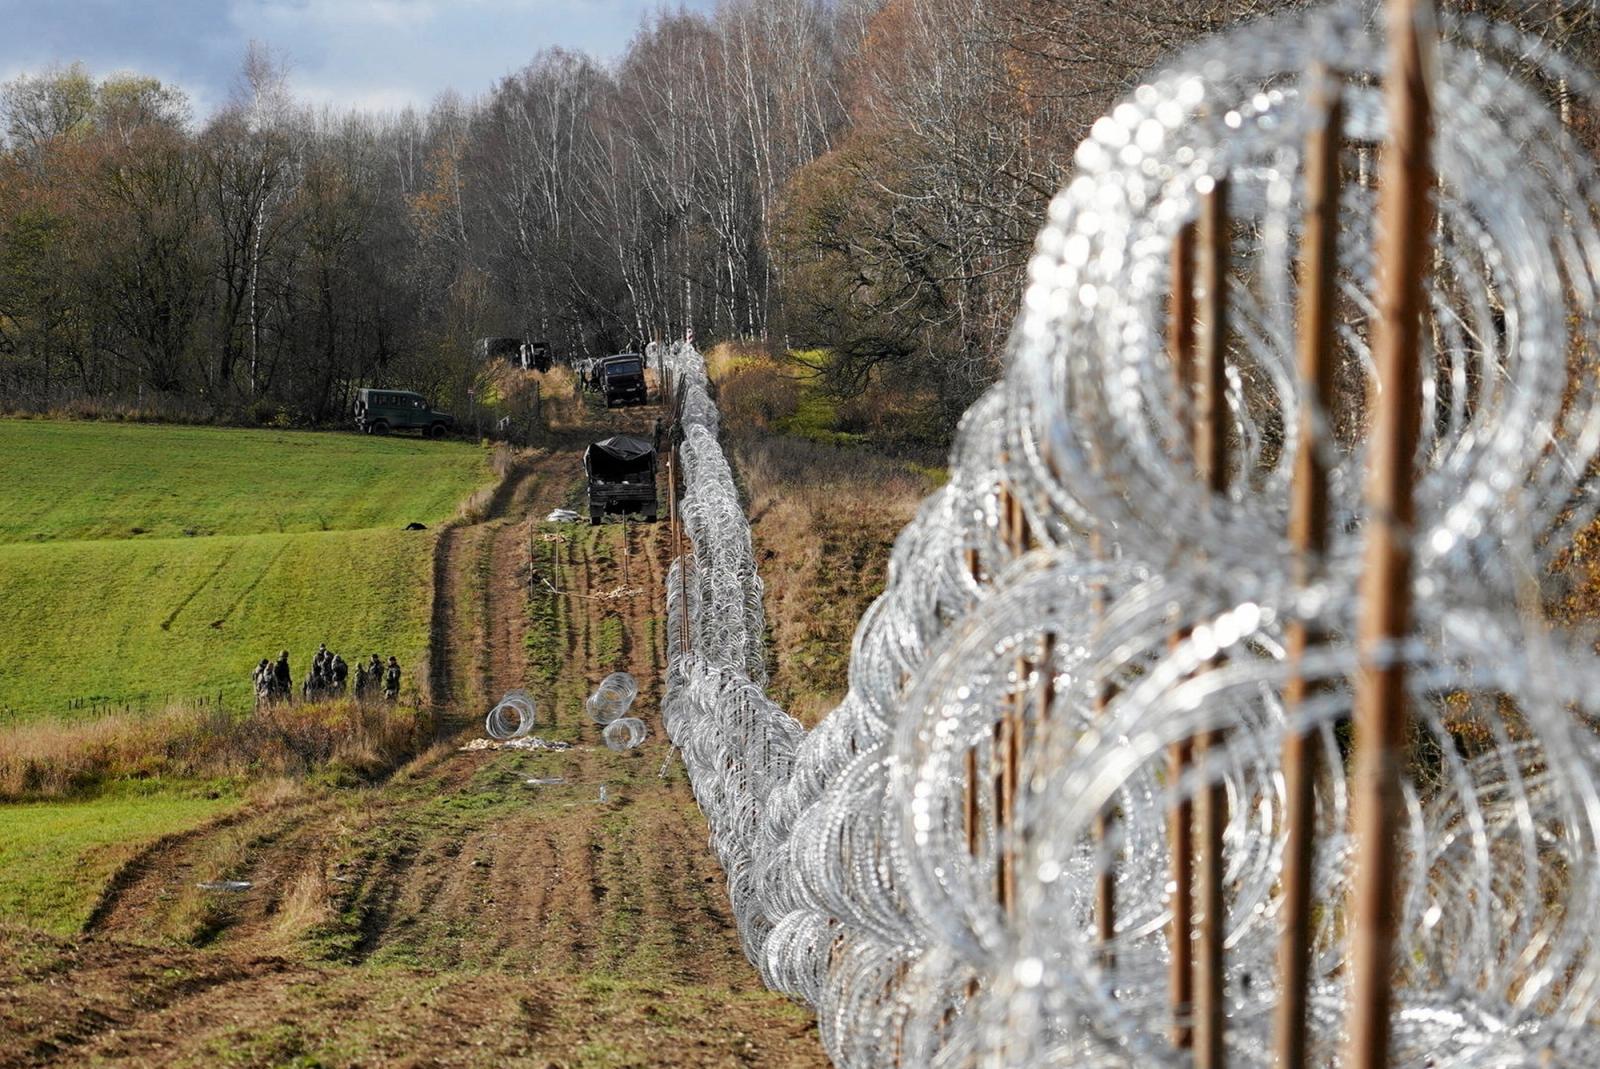 Soldiers build razor wire fence on Poland's border with Russia's exclave of Kaliningrad near Bolcie, Poland November 3, 2022.